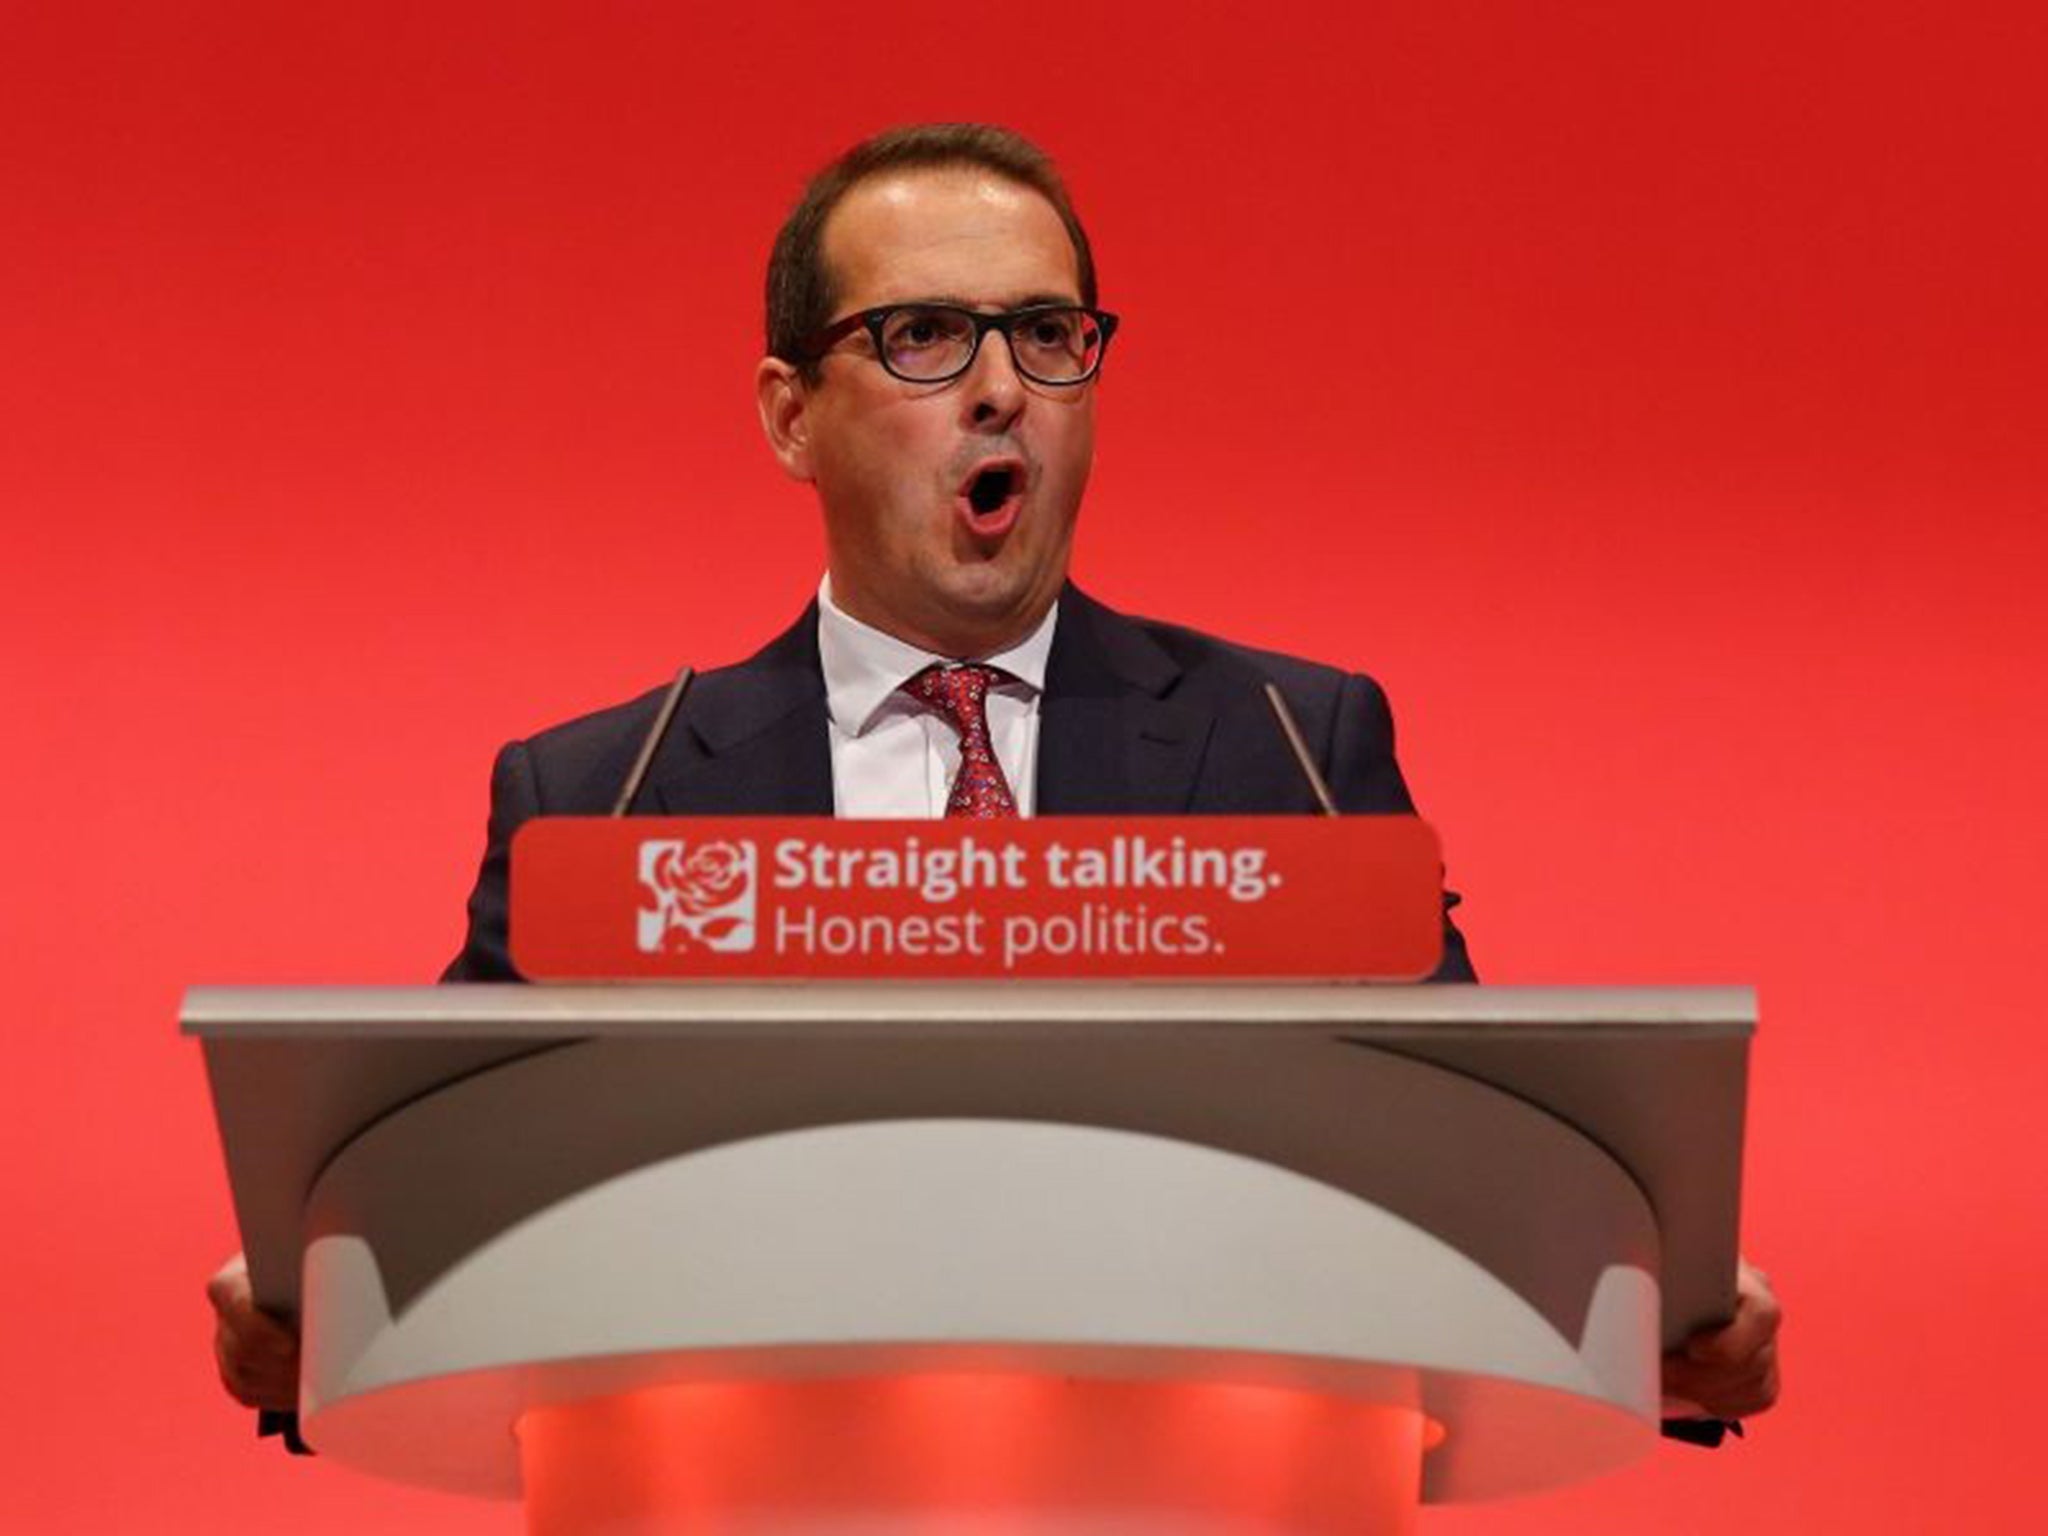 Owen Smith's team believe he has the advantage of not voting for the Iraq War – he was not an MP in 2003